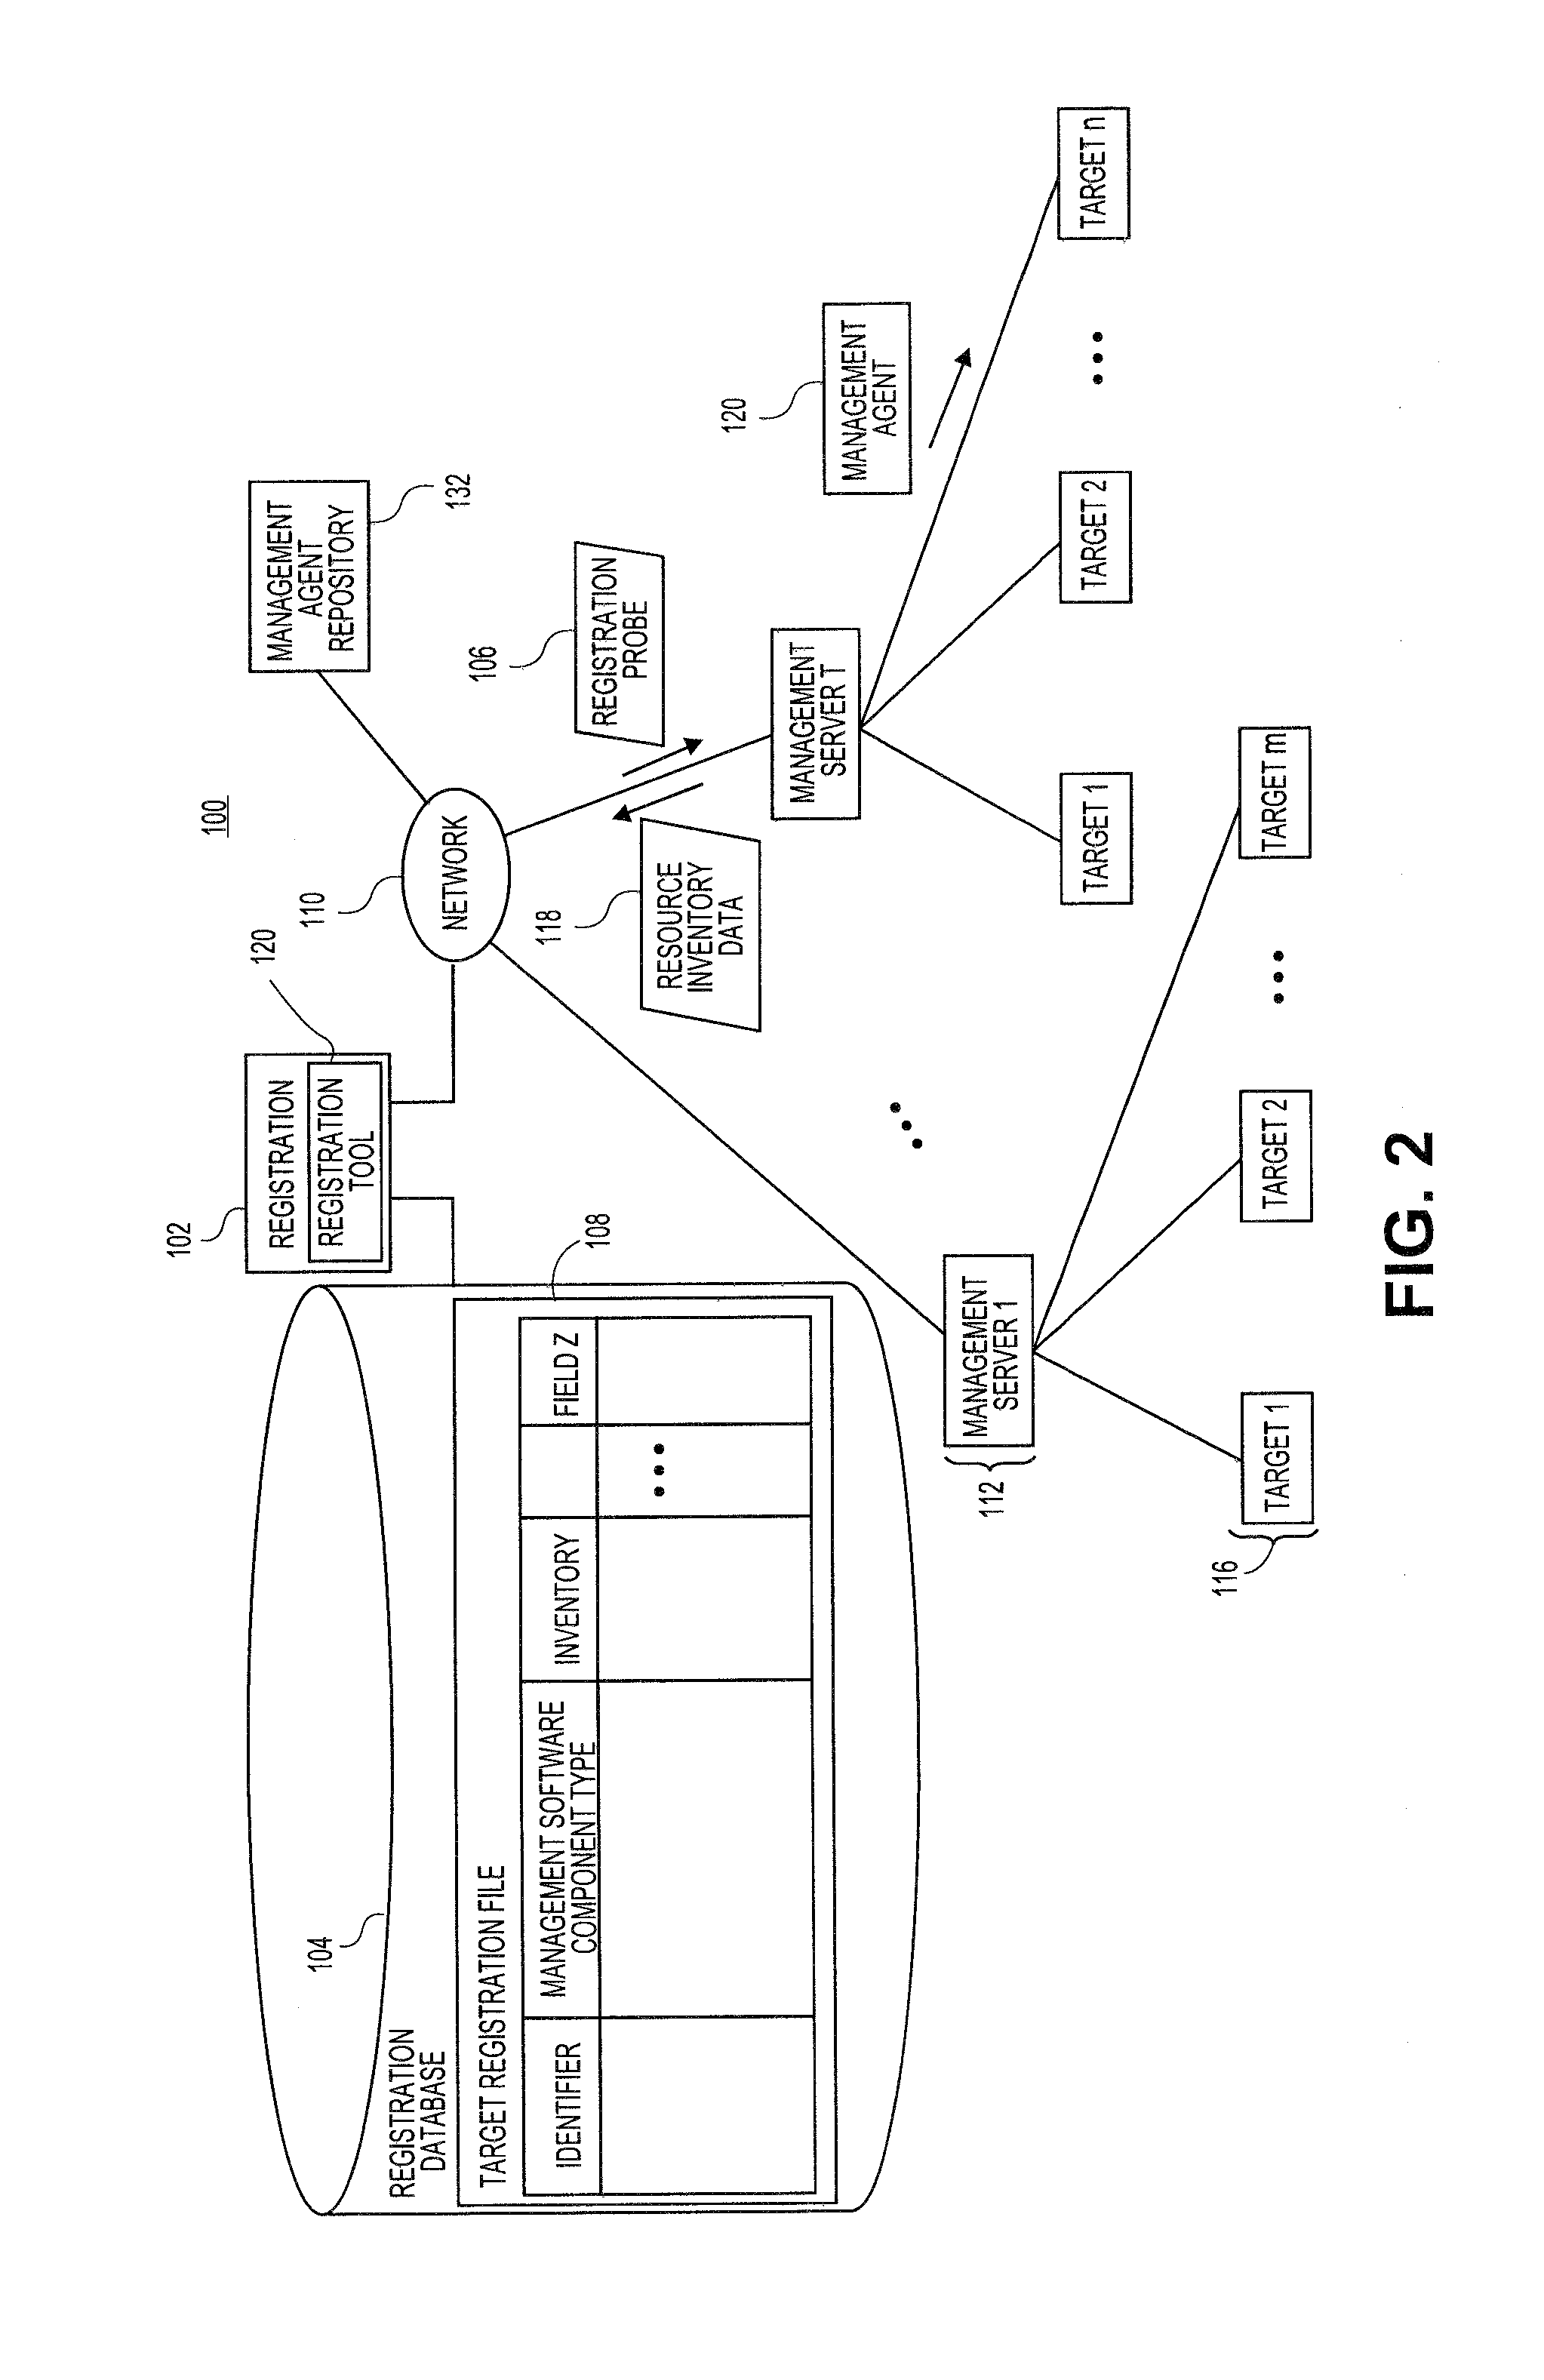 Systems and methods for registering software management component types in a managed network